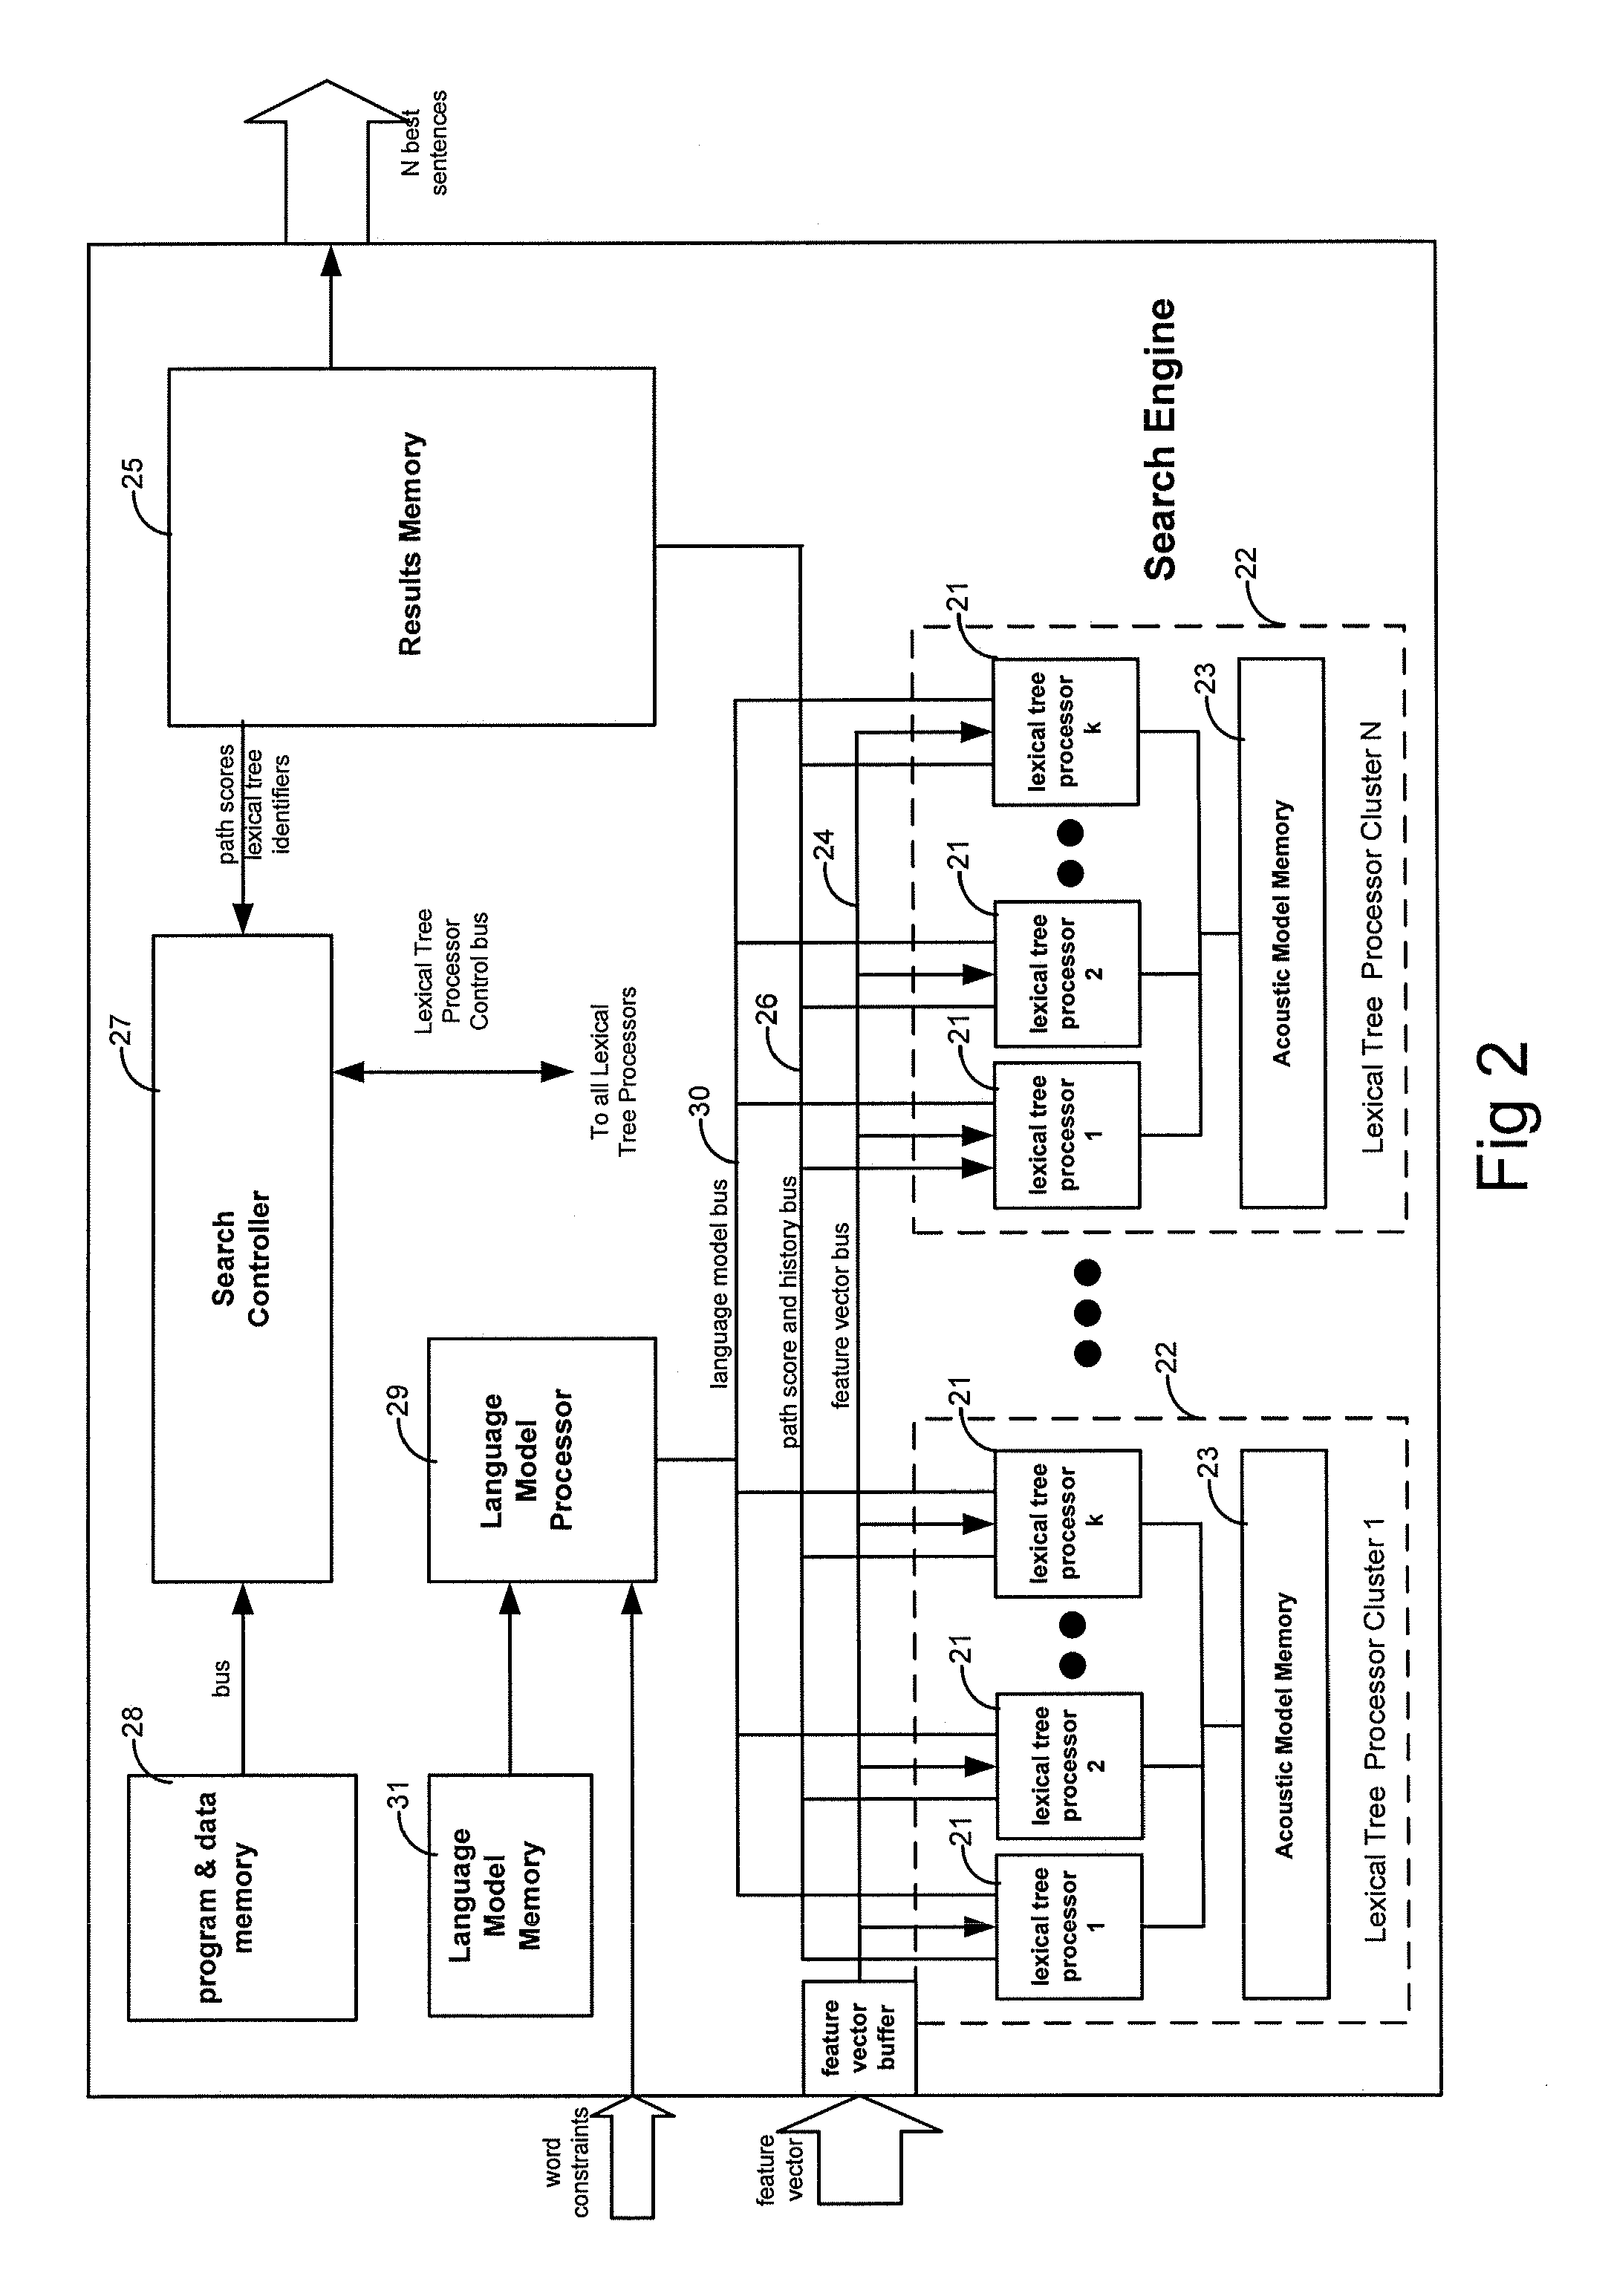 Speech recognition circuit using parallel processors